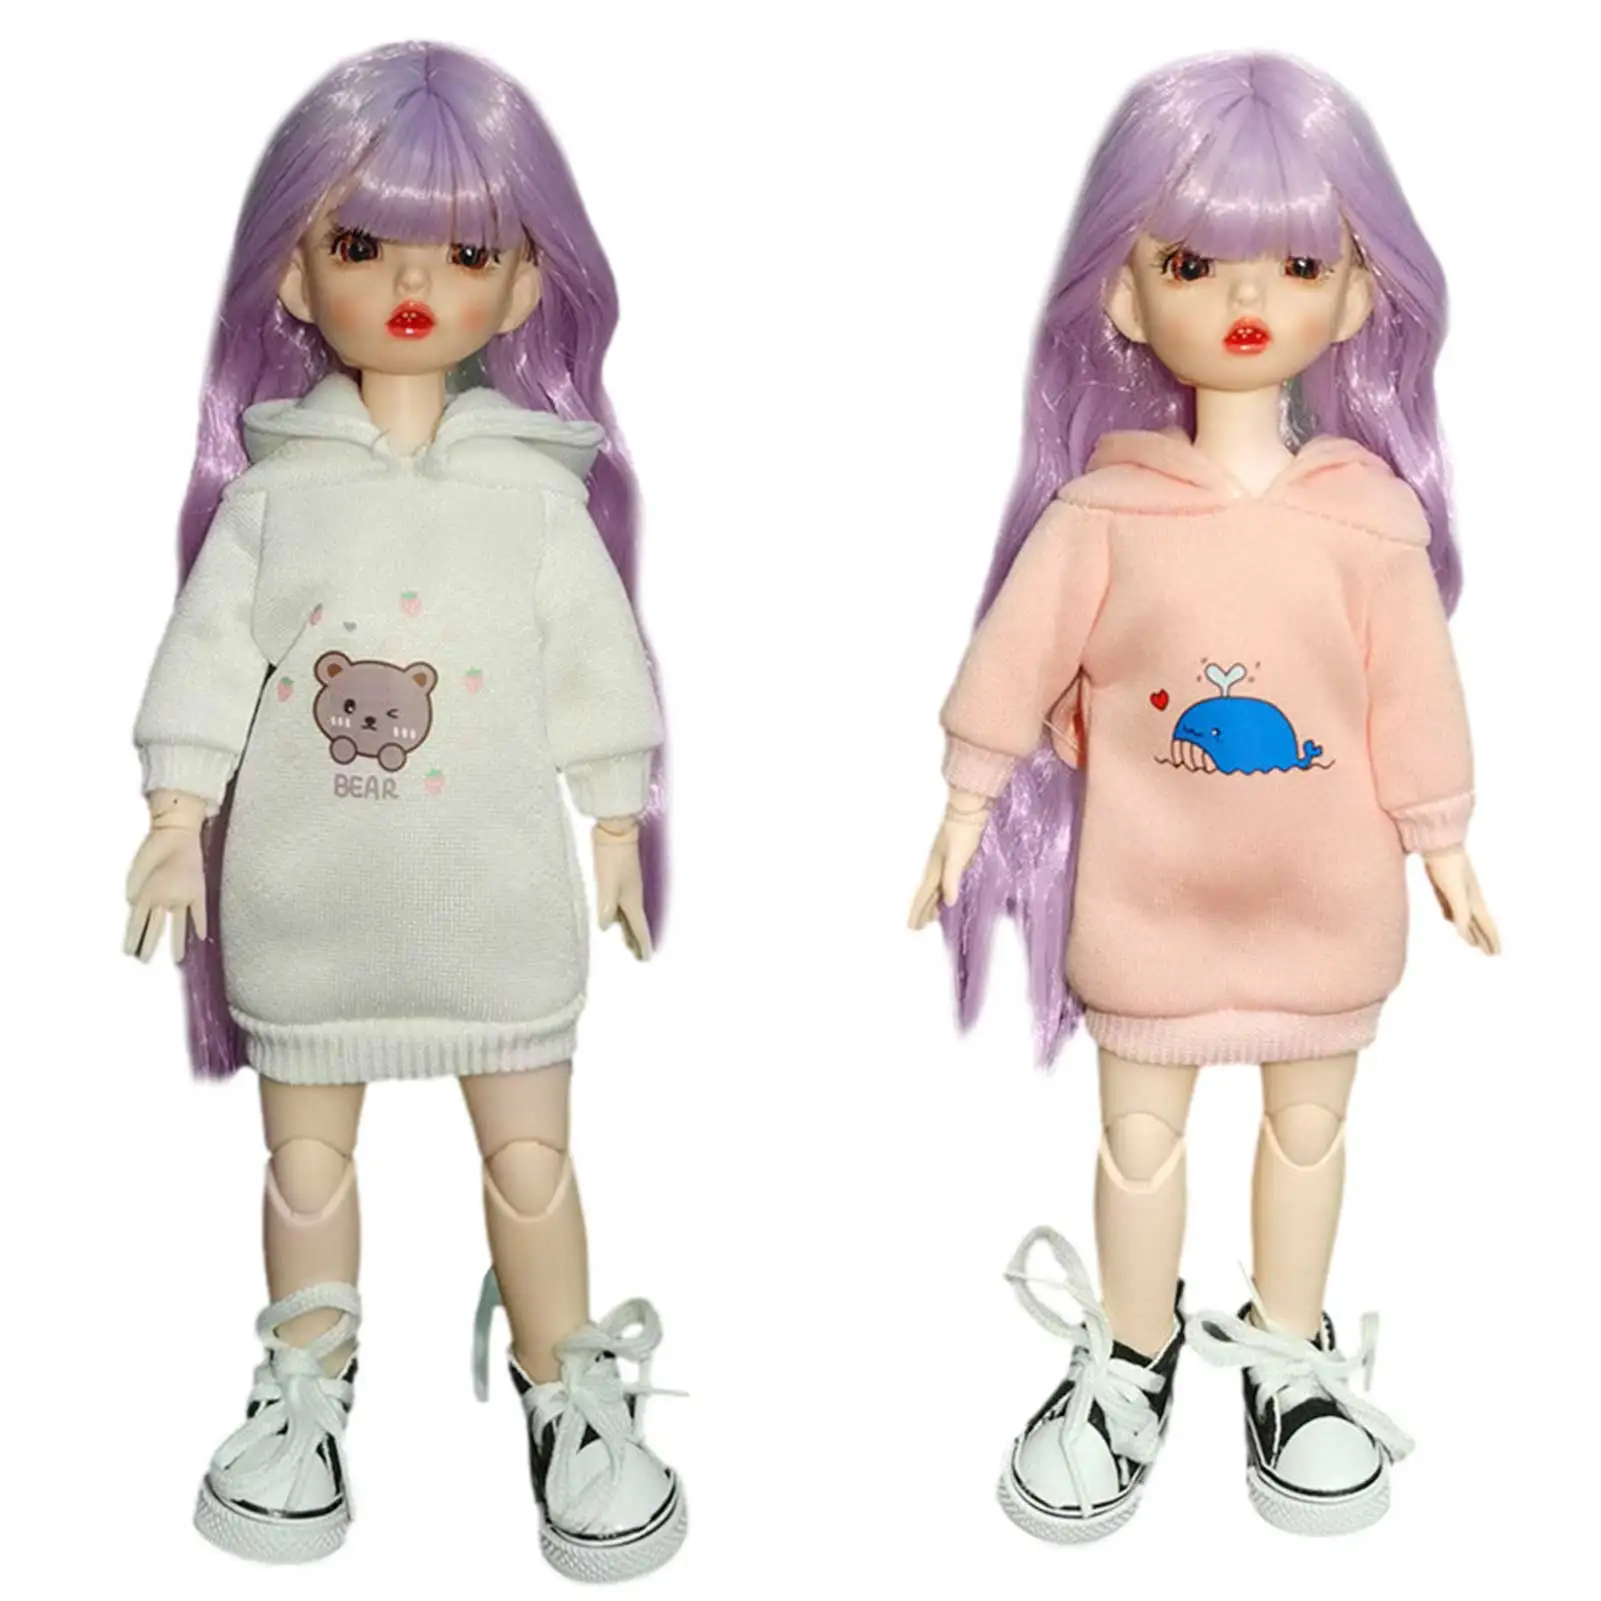 

New 30 Cm Baby Sweater Doll 6 Points Clothes Cute Girl Dolls Handmade Adjustable Ball Jointed Doll DIY Toys For Children Gift